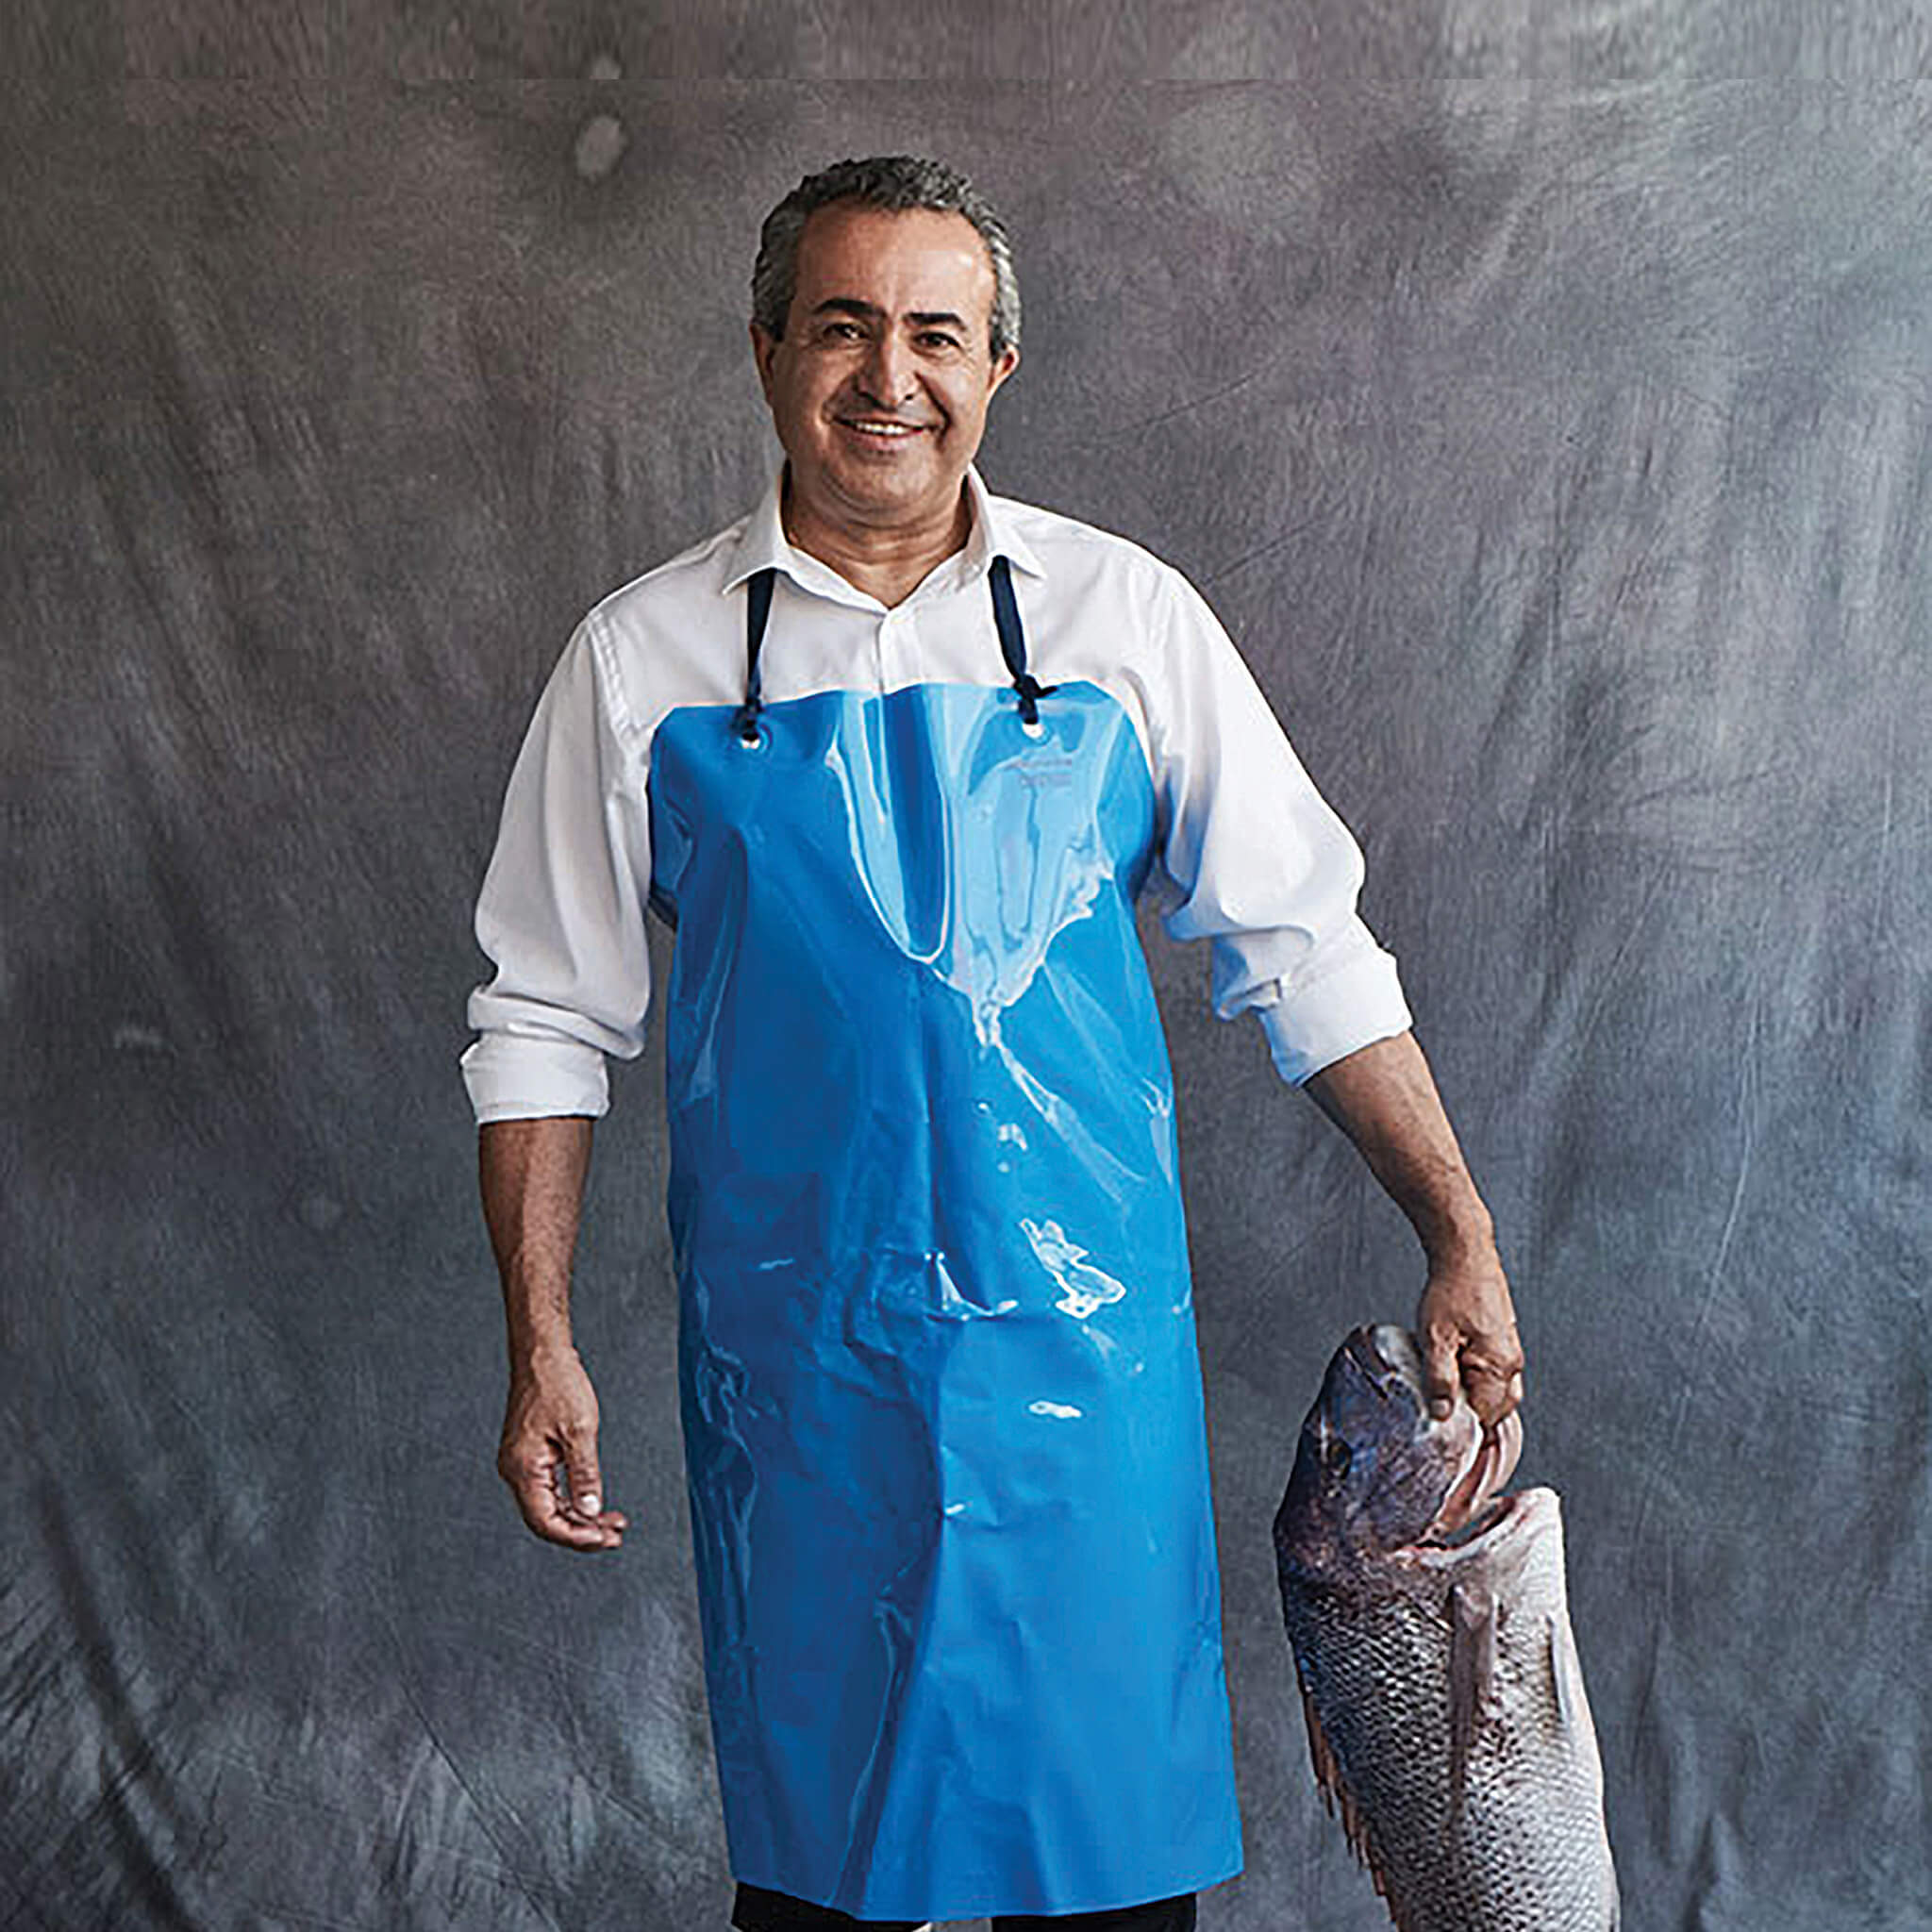 Steve Costi the owner of Steve Costi's Seafood fish a fresh fish